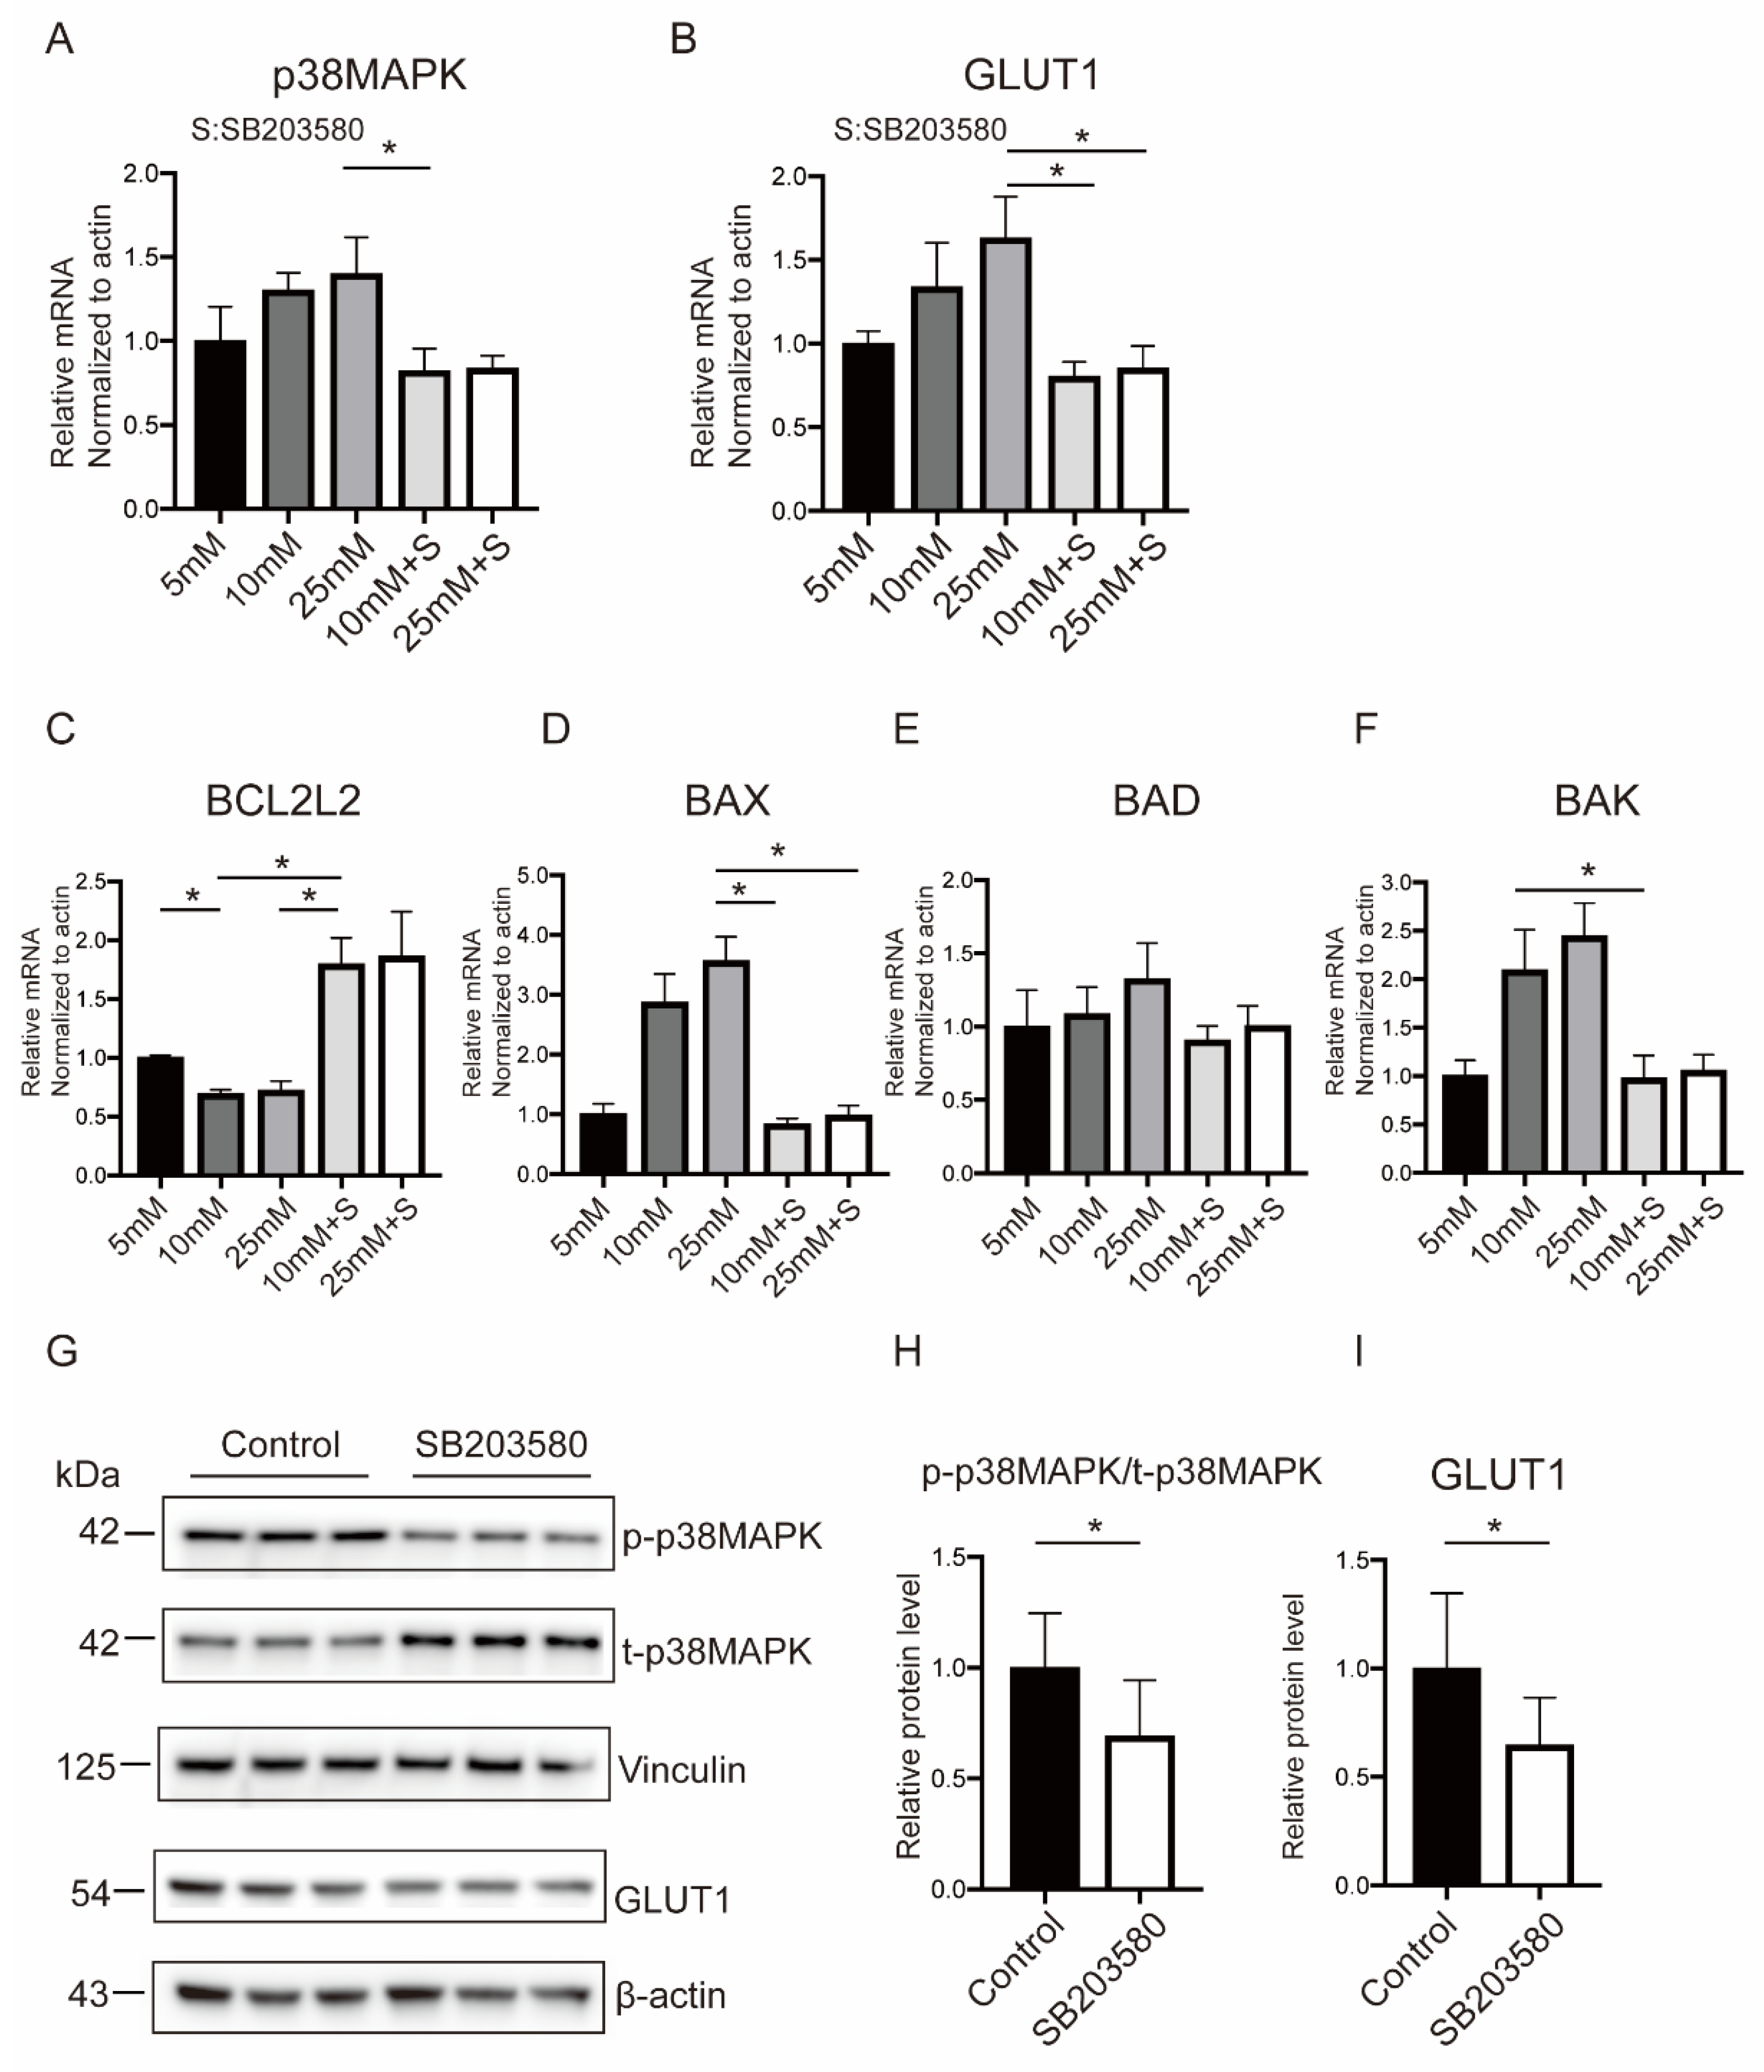 IJMS | Free Full-Text | Hyperglycemia in Pregnancy-Associated Oxidative  Stress Augments Altered Placental Glucose Transporter 1 Trafficking via  AMPK&alpha;/p38MAPK Signaling Cascade